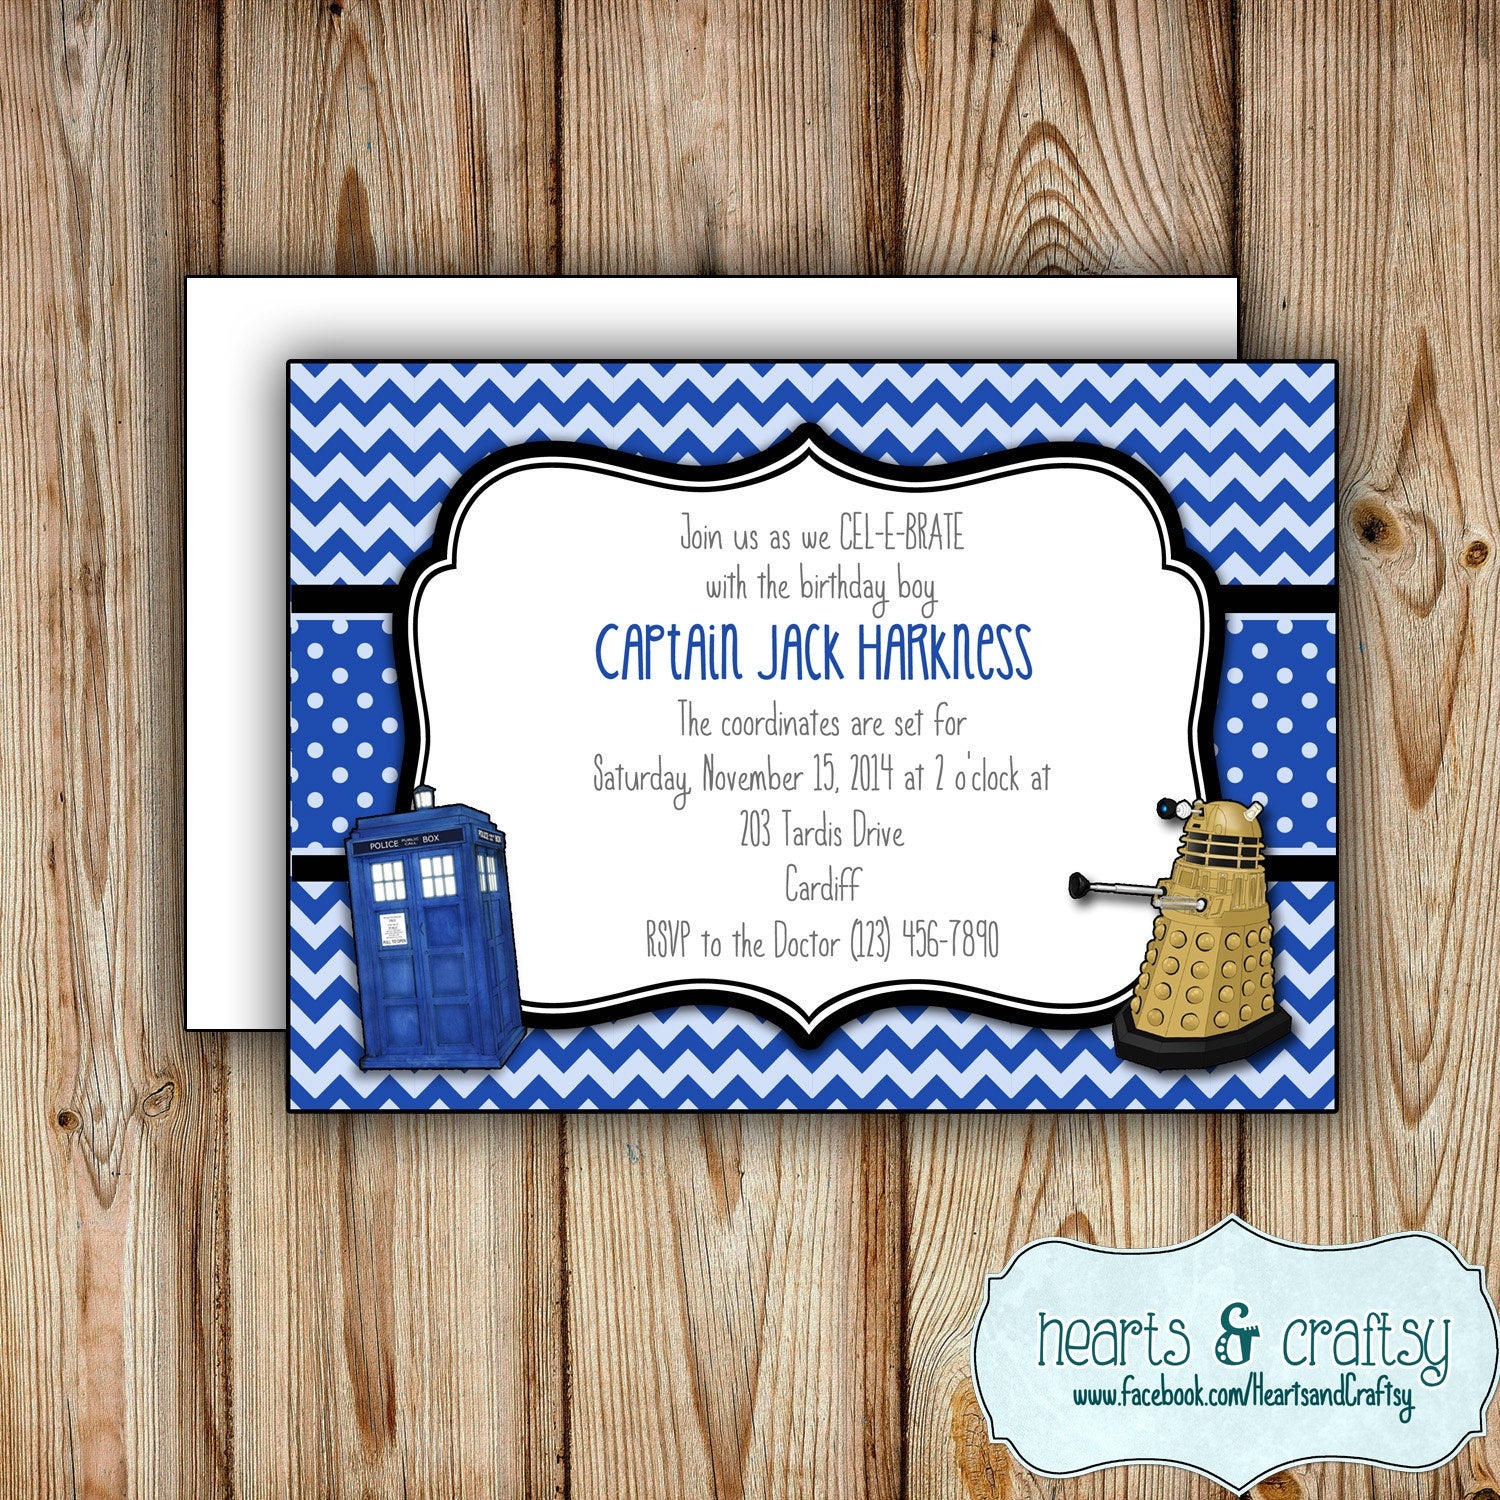 Personalized Printable Doctor Who Party Invitation Doctor | Etsy - Doctor Who Party Invitations Printable Free